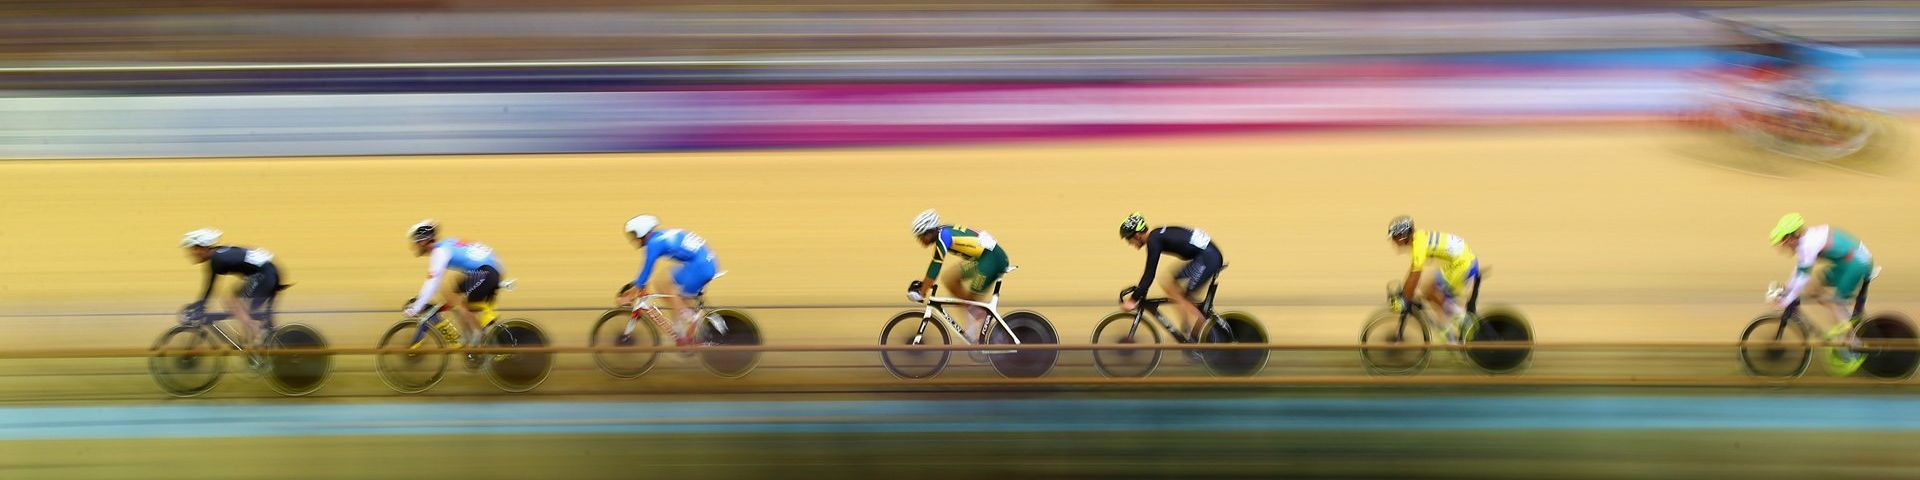 A photograph of seven professional cyclists in a line along what must be a velodrome. However, the photograph has substantial motion blur and all that can be seen of the background are streaks of yellow, blue and pink.